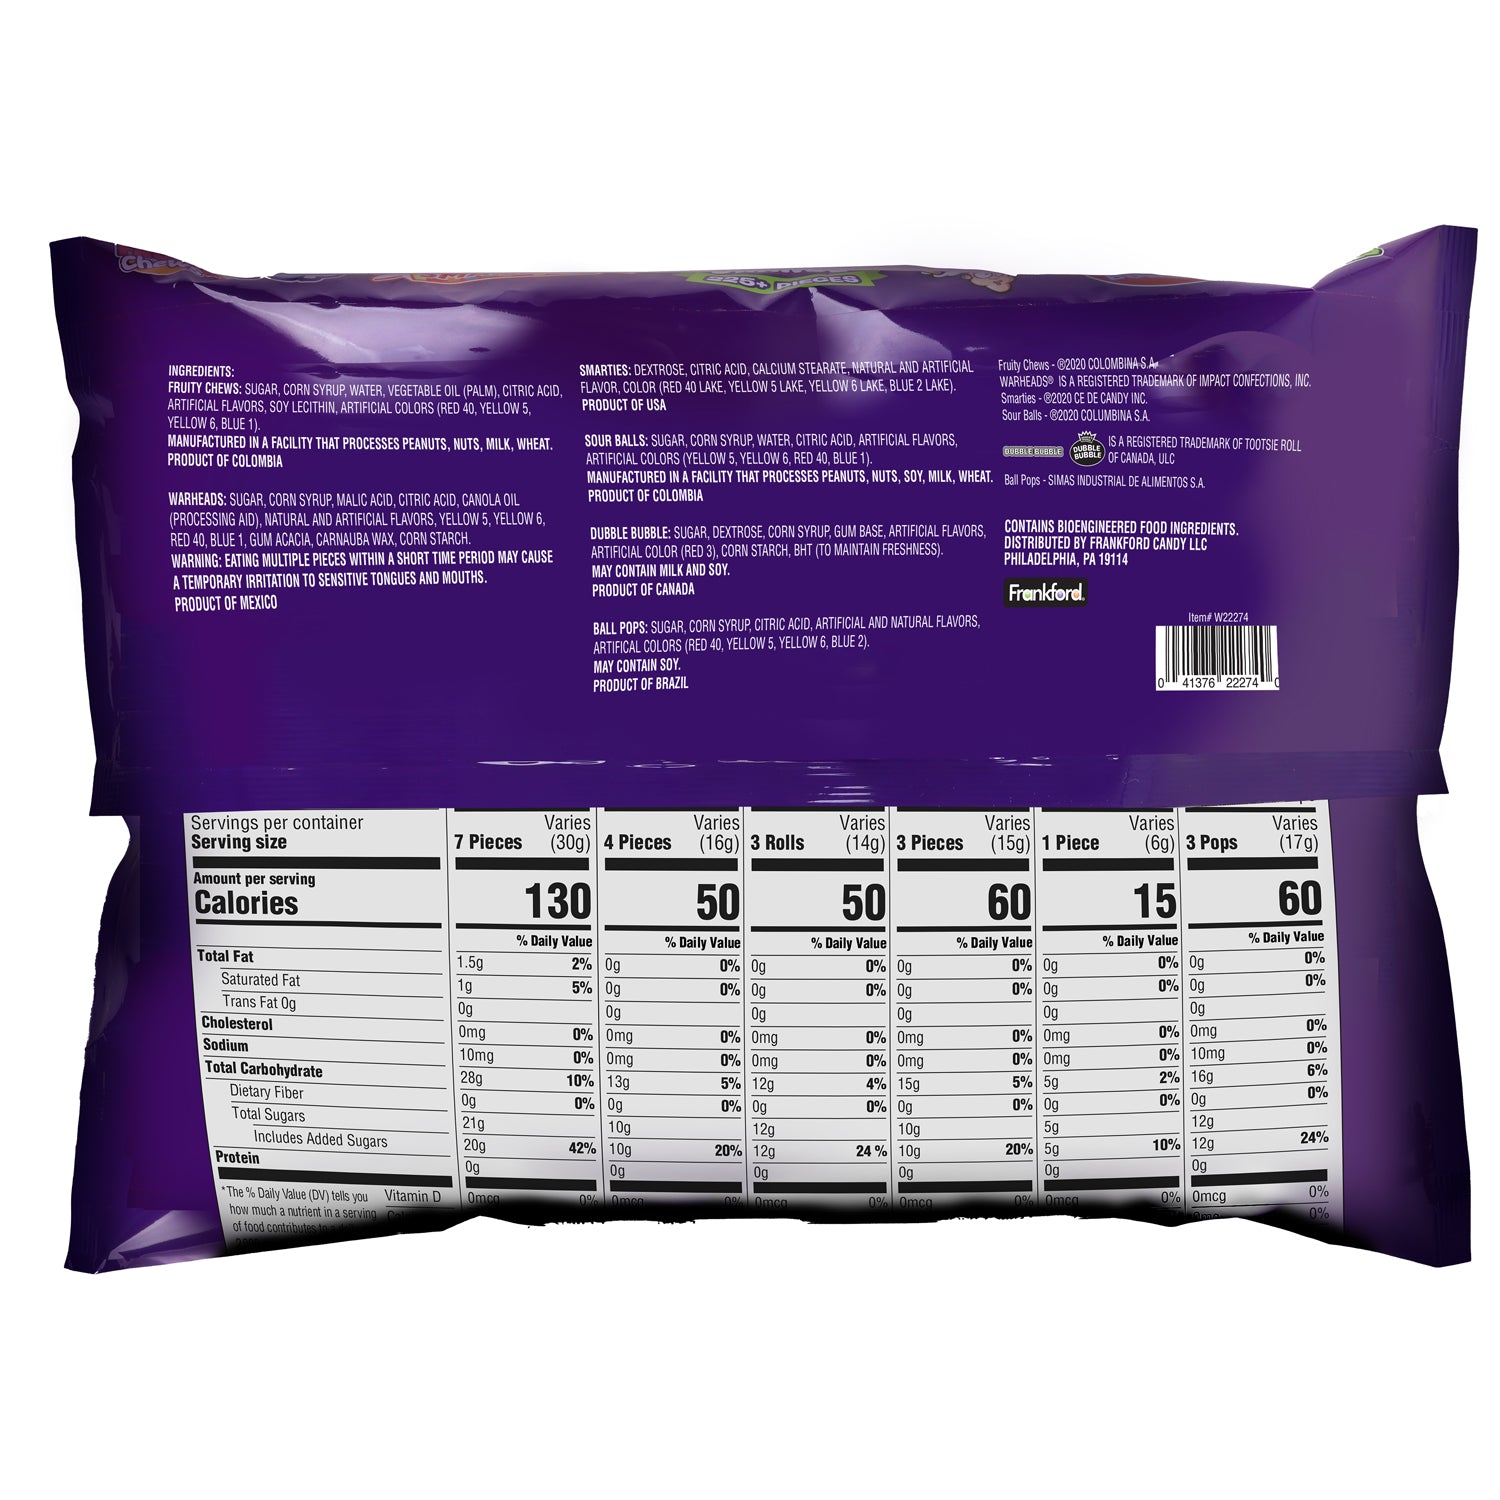 back of bag with nutrition facts and ingredients